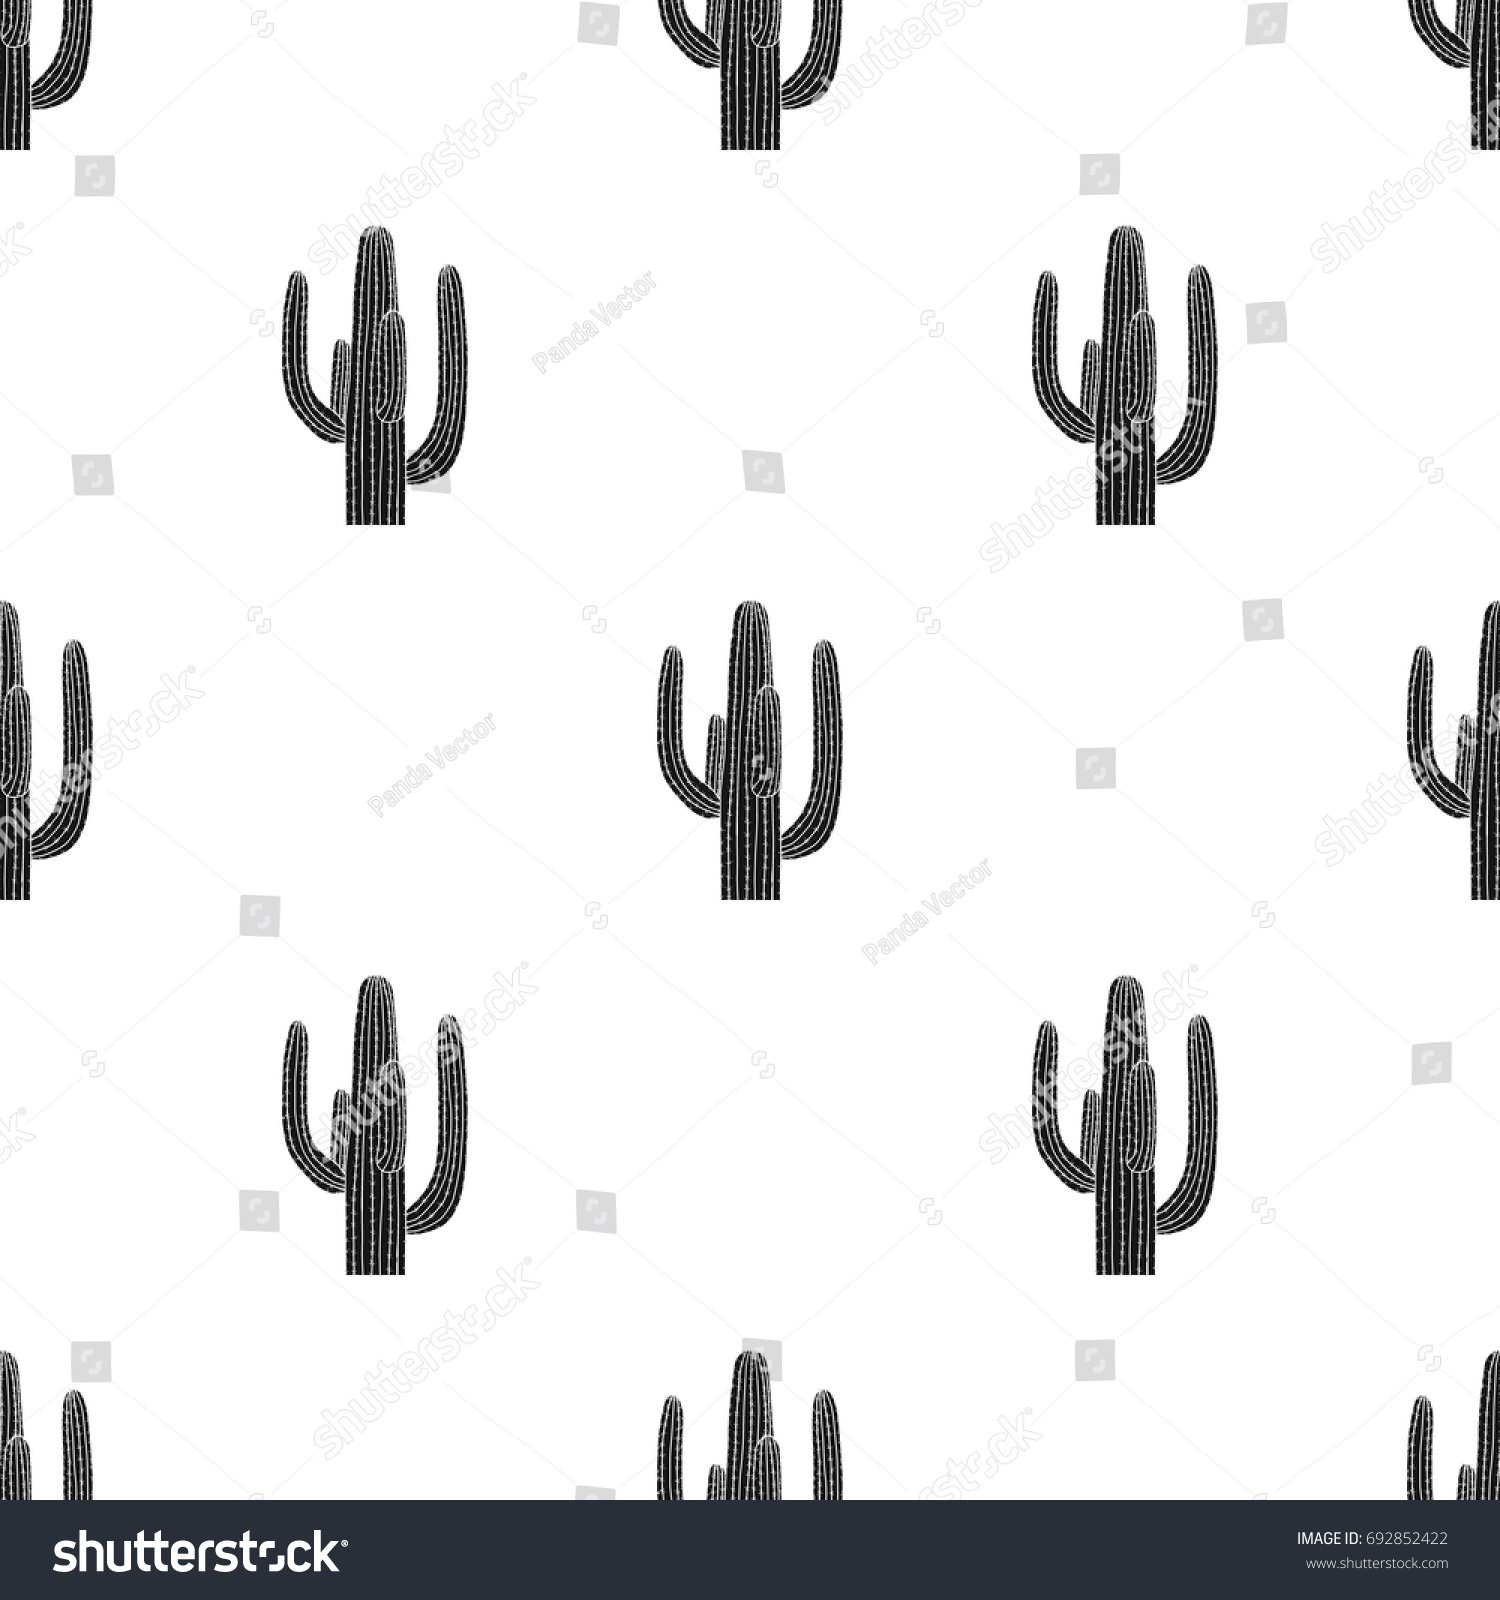 SVG of Mexican cactus icon in black style isolated on white background. Mexico country symbol stock vector illustration. svg